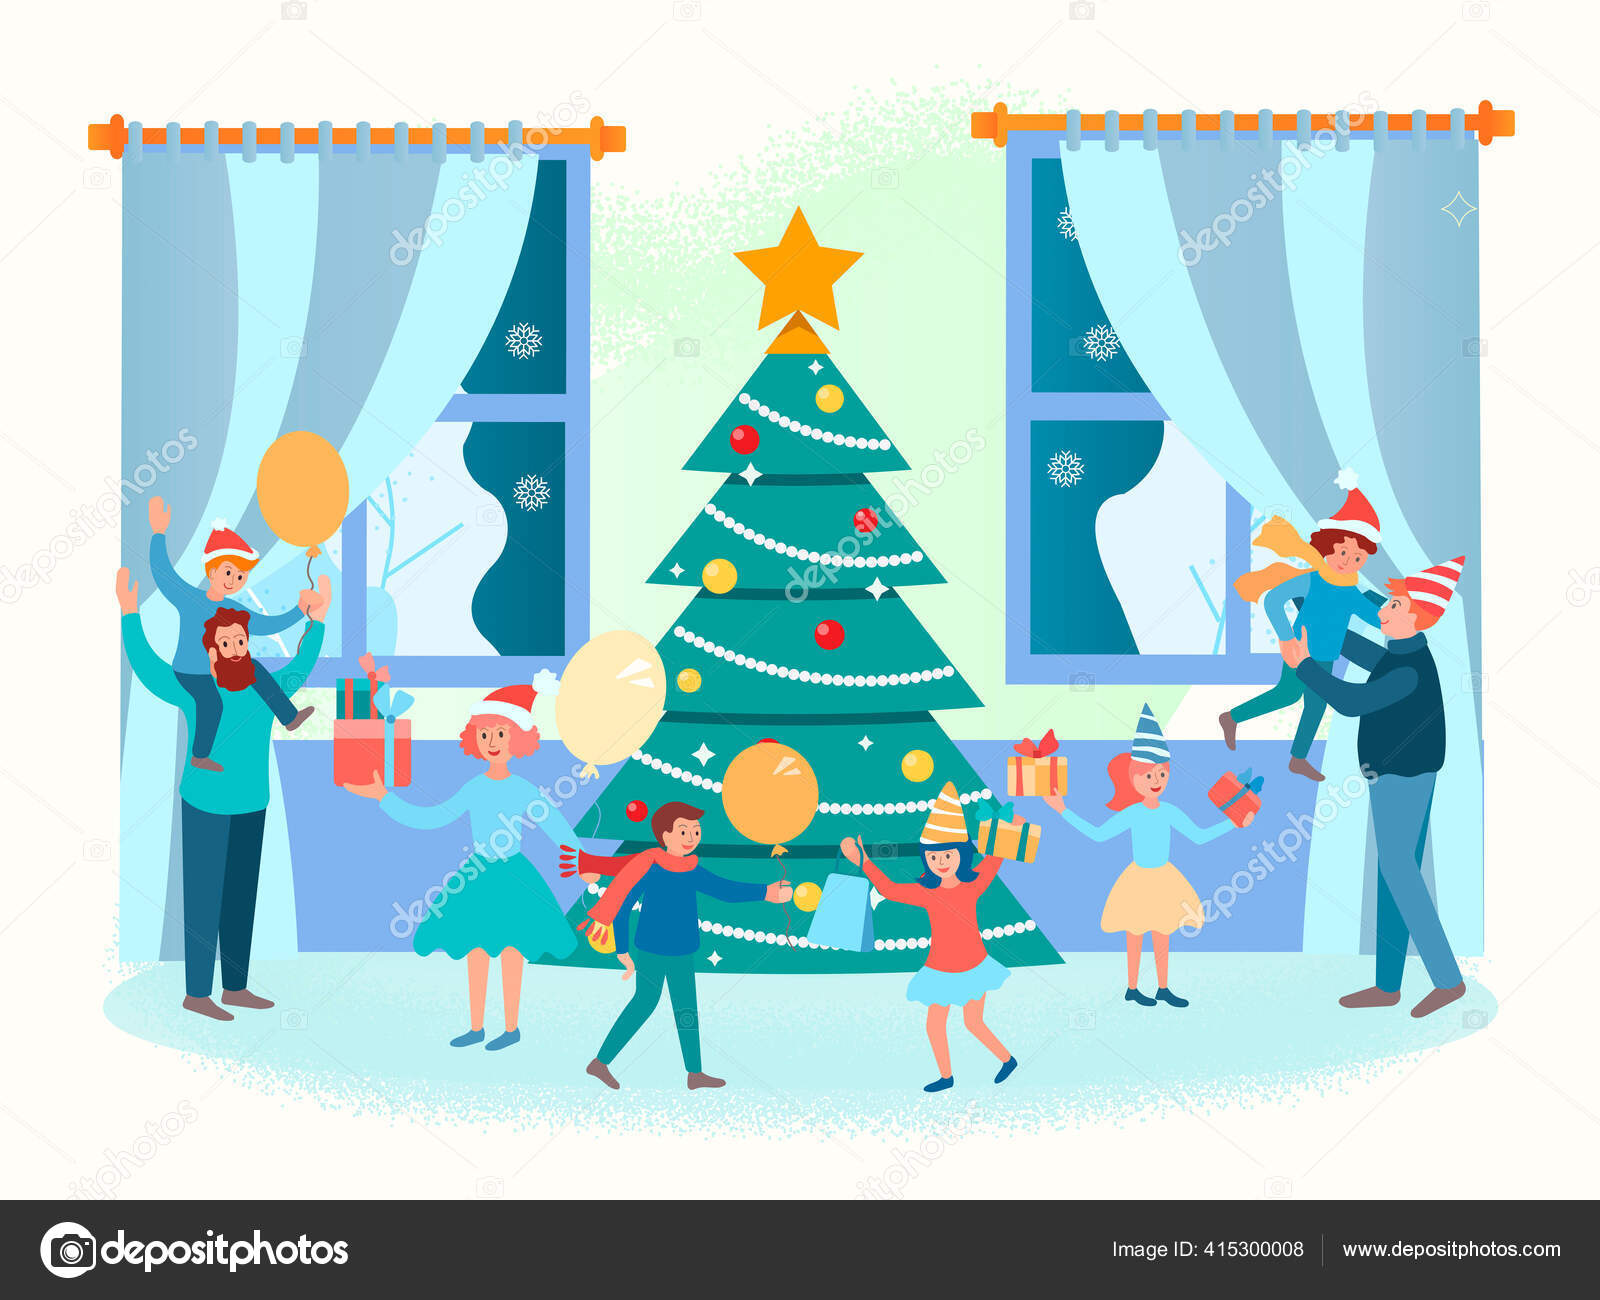 Christmas Family Gatherings Christmas Tree New Year Family Concept Vector Vector Image By AlisaRut Vector Stock 415300008